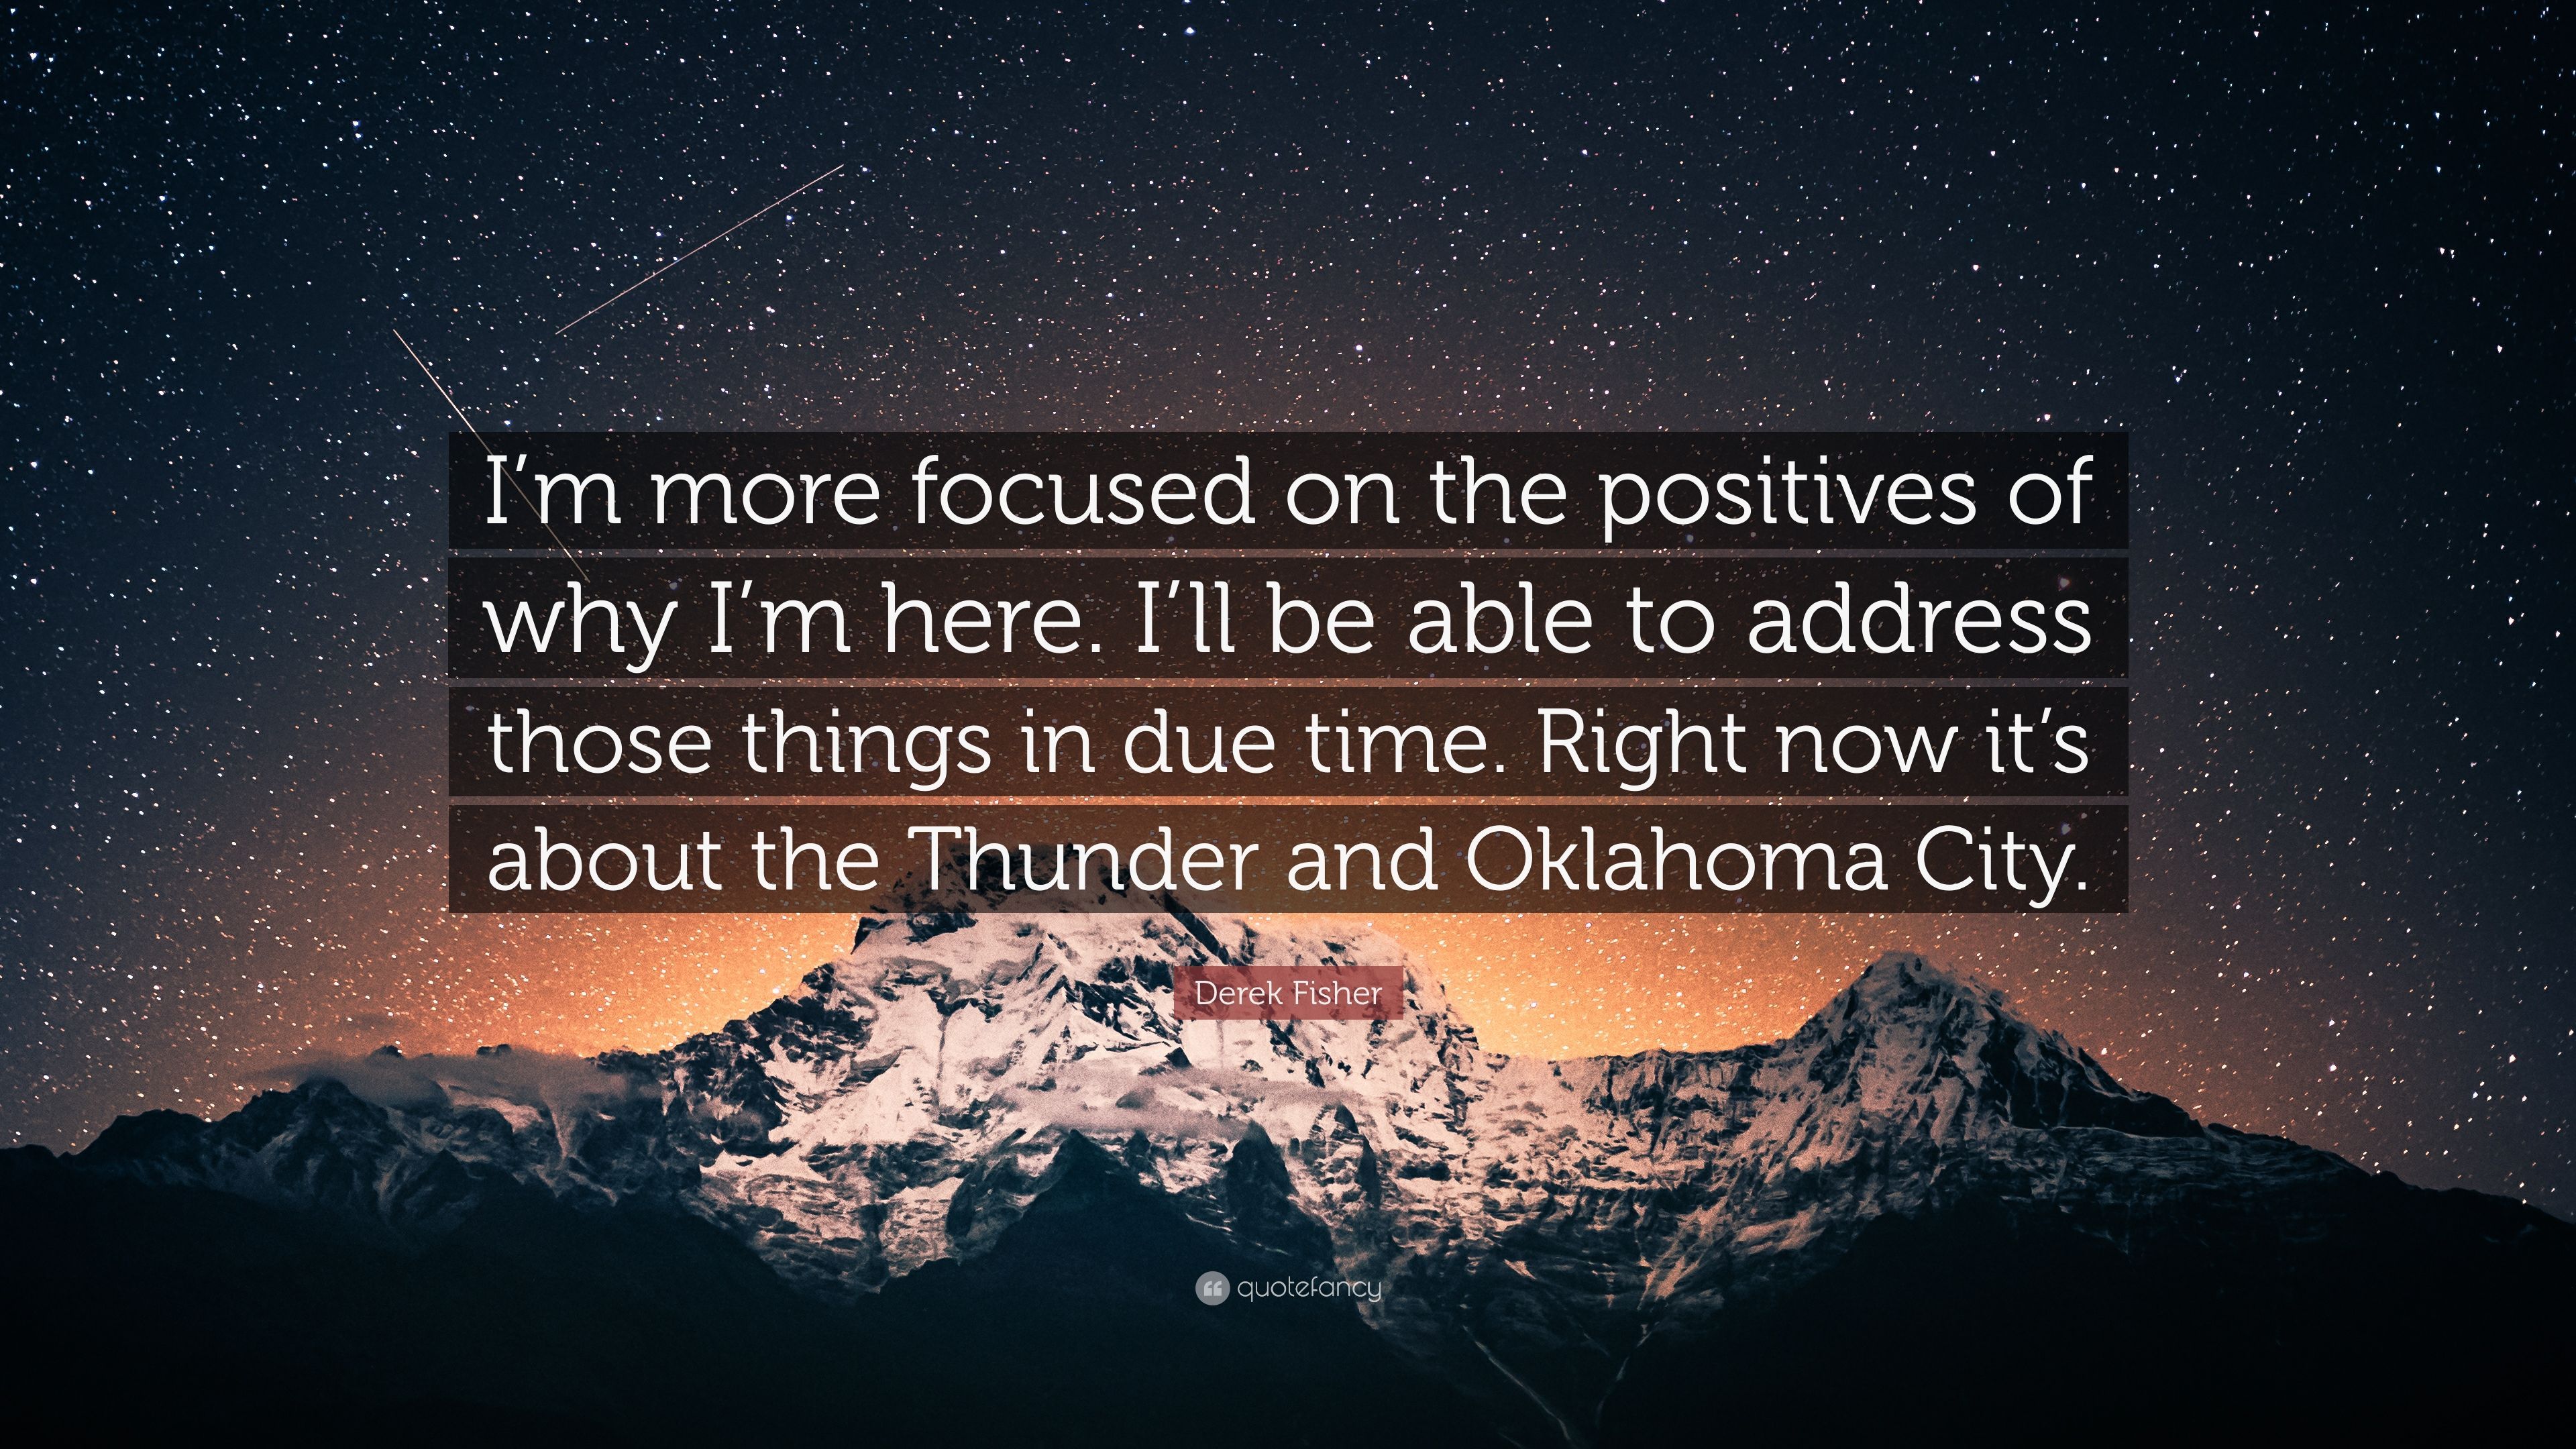 Derek Fisher Quote: “I'm more focused on the positives of why I'm